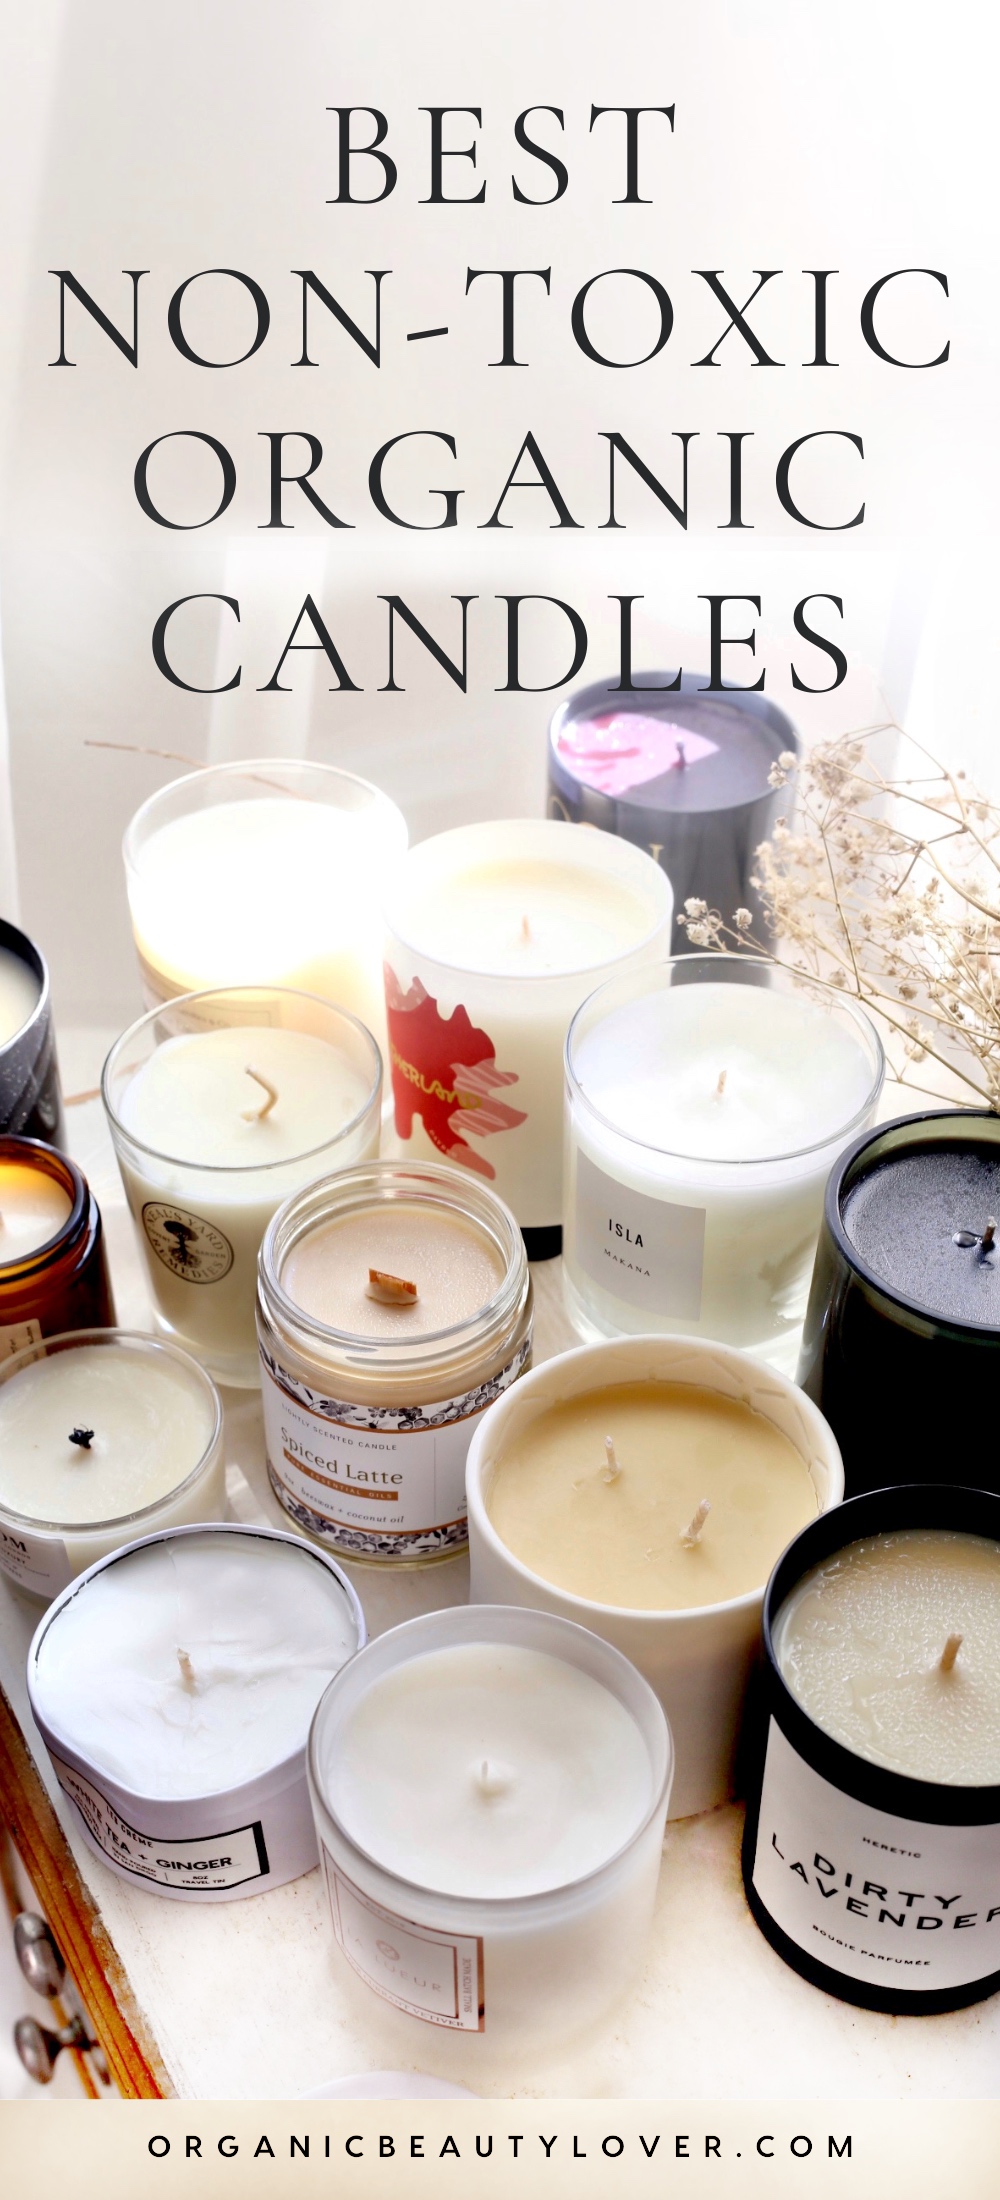 The 8 most elegant designer candles of the moment